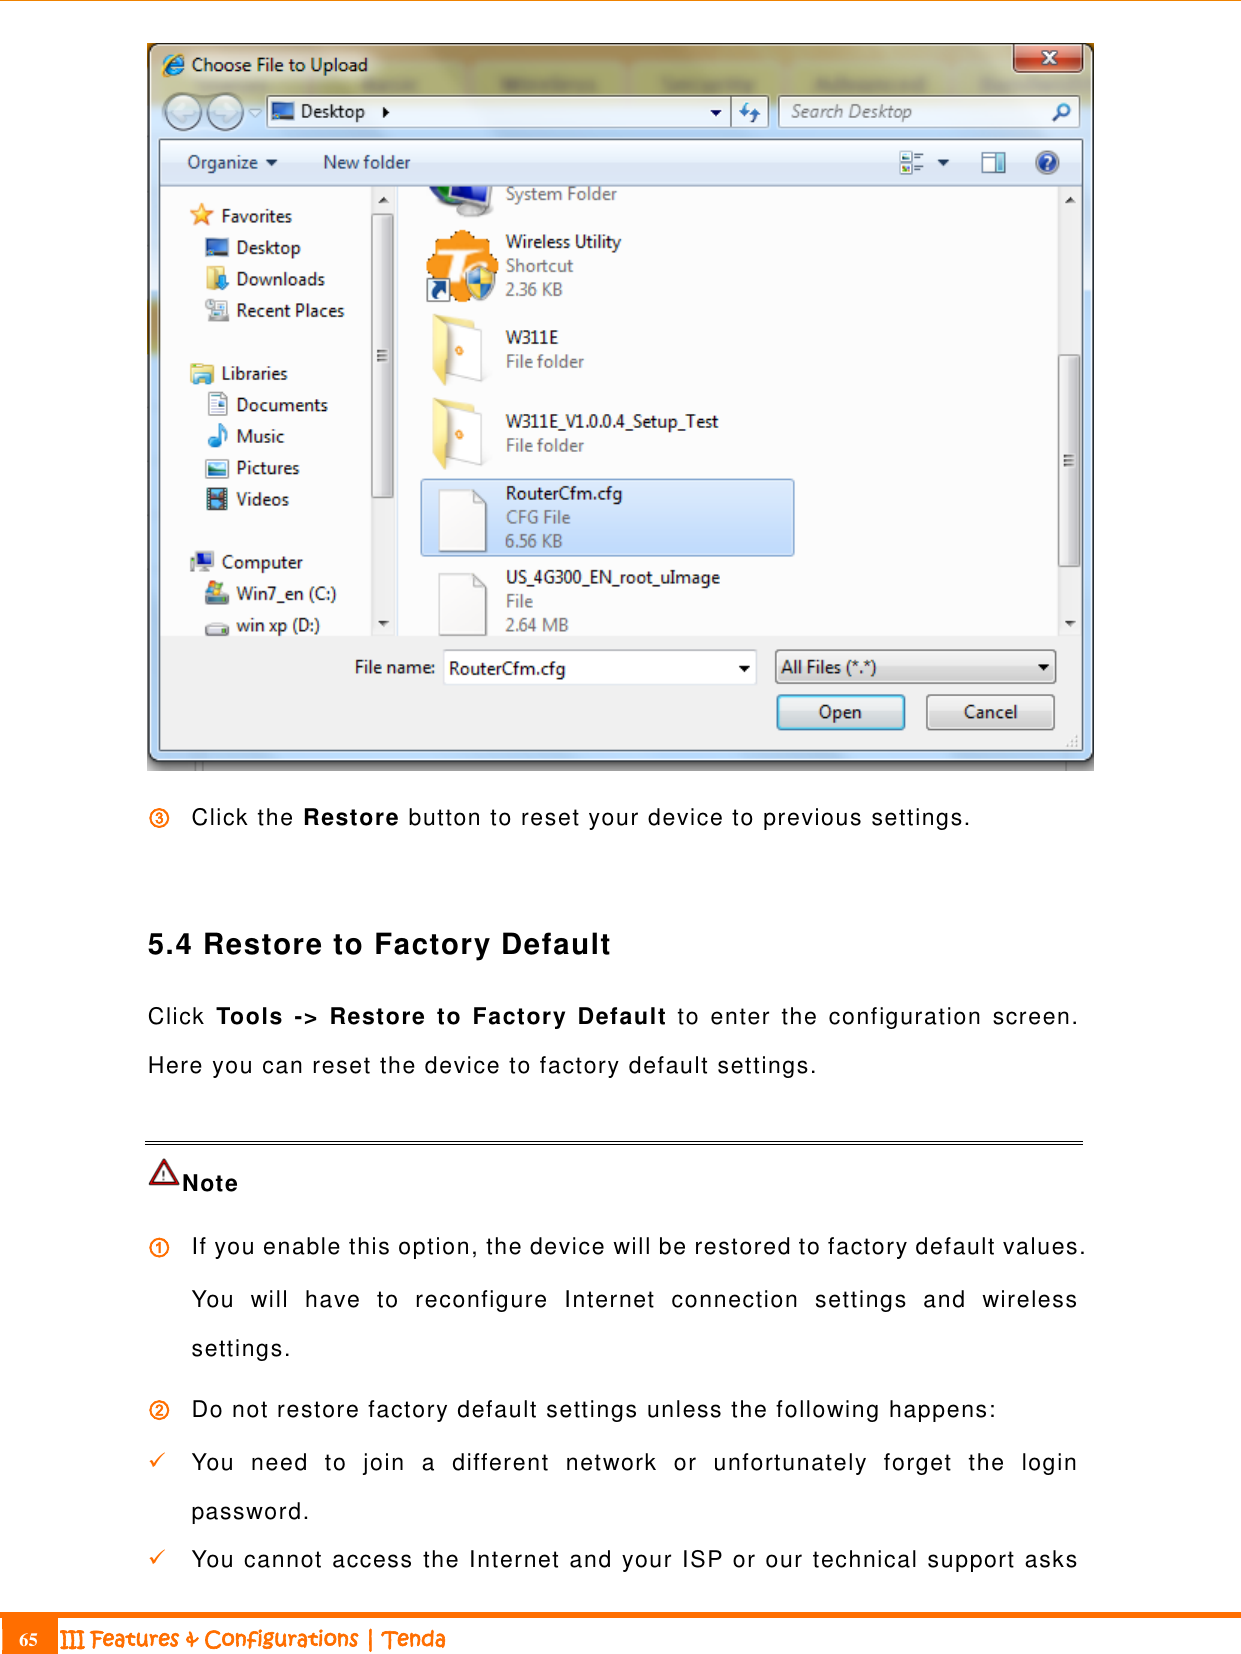                                                                             65 III Features &amp; Configurations | Tenda   ③ Click the Restore button to reset your device to previous settings.  5.4 Restore to Factory Default Click  Tools  -&gt;  Restore  to  Factory  Default to  enter  the  configuration  screen. Here you can reset the device to factory default settings.   Note   ① If you enable this option, the device will be restored to factory default values. You  will  have  to  reconfigure  Internet  connection  settings  and  wireless settings. ② Do not restore factory default settings unless the following happens:   You  need  to  join  a  different  network  or  unfortunately  forget  the  login password.  You cannot access the Internet and your ISP or our technical support asks 